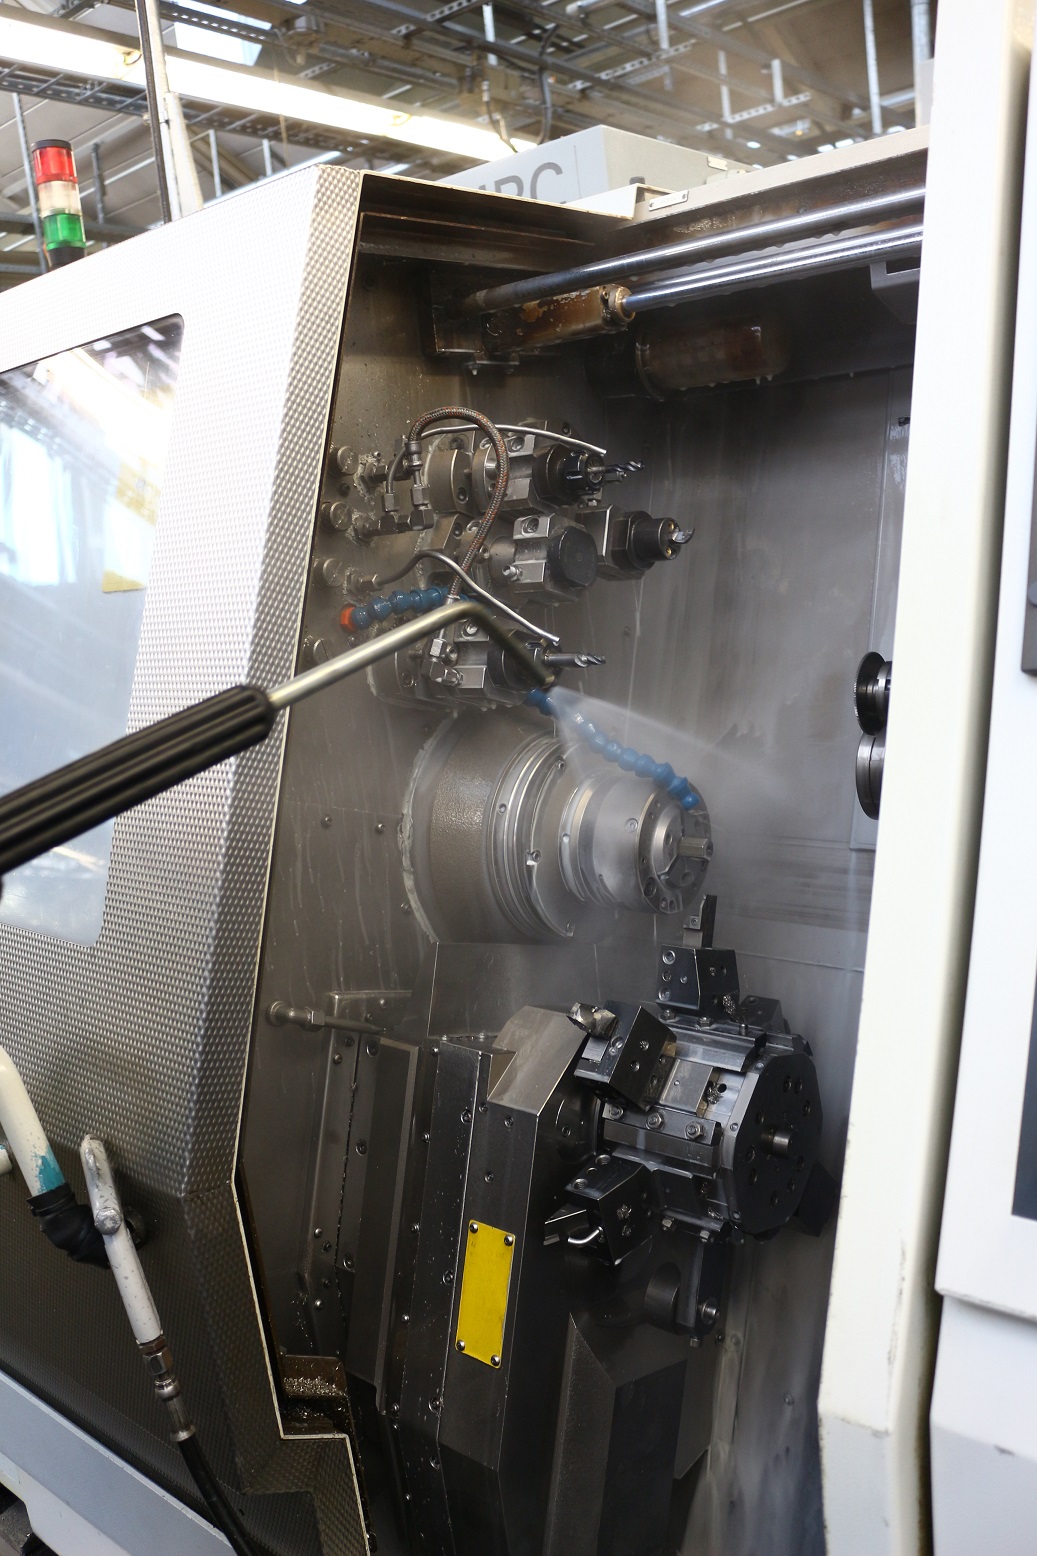 Cleaning, machining centre, 5-axis machining centre, turn-drill-mill machining centre, turning centre, drilling centre, milling centre, machine tool, tooling machine, cabin